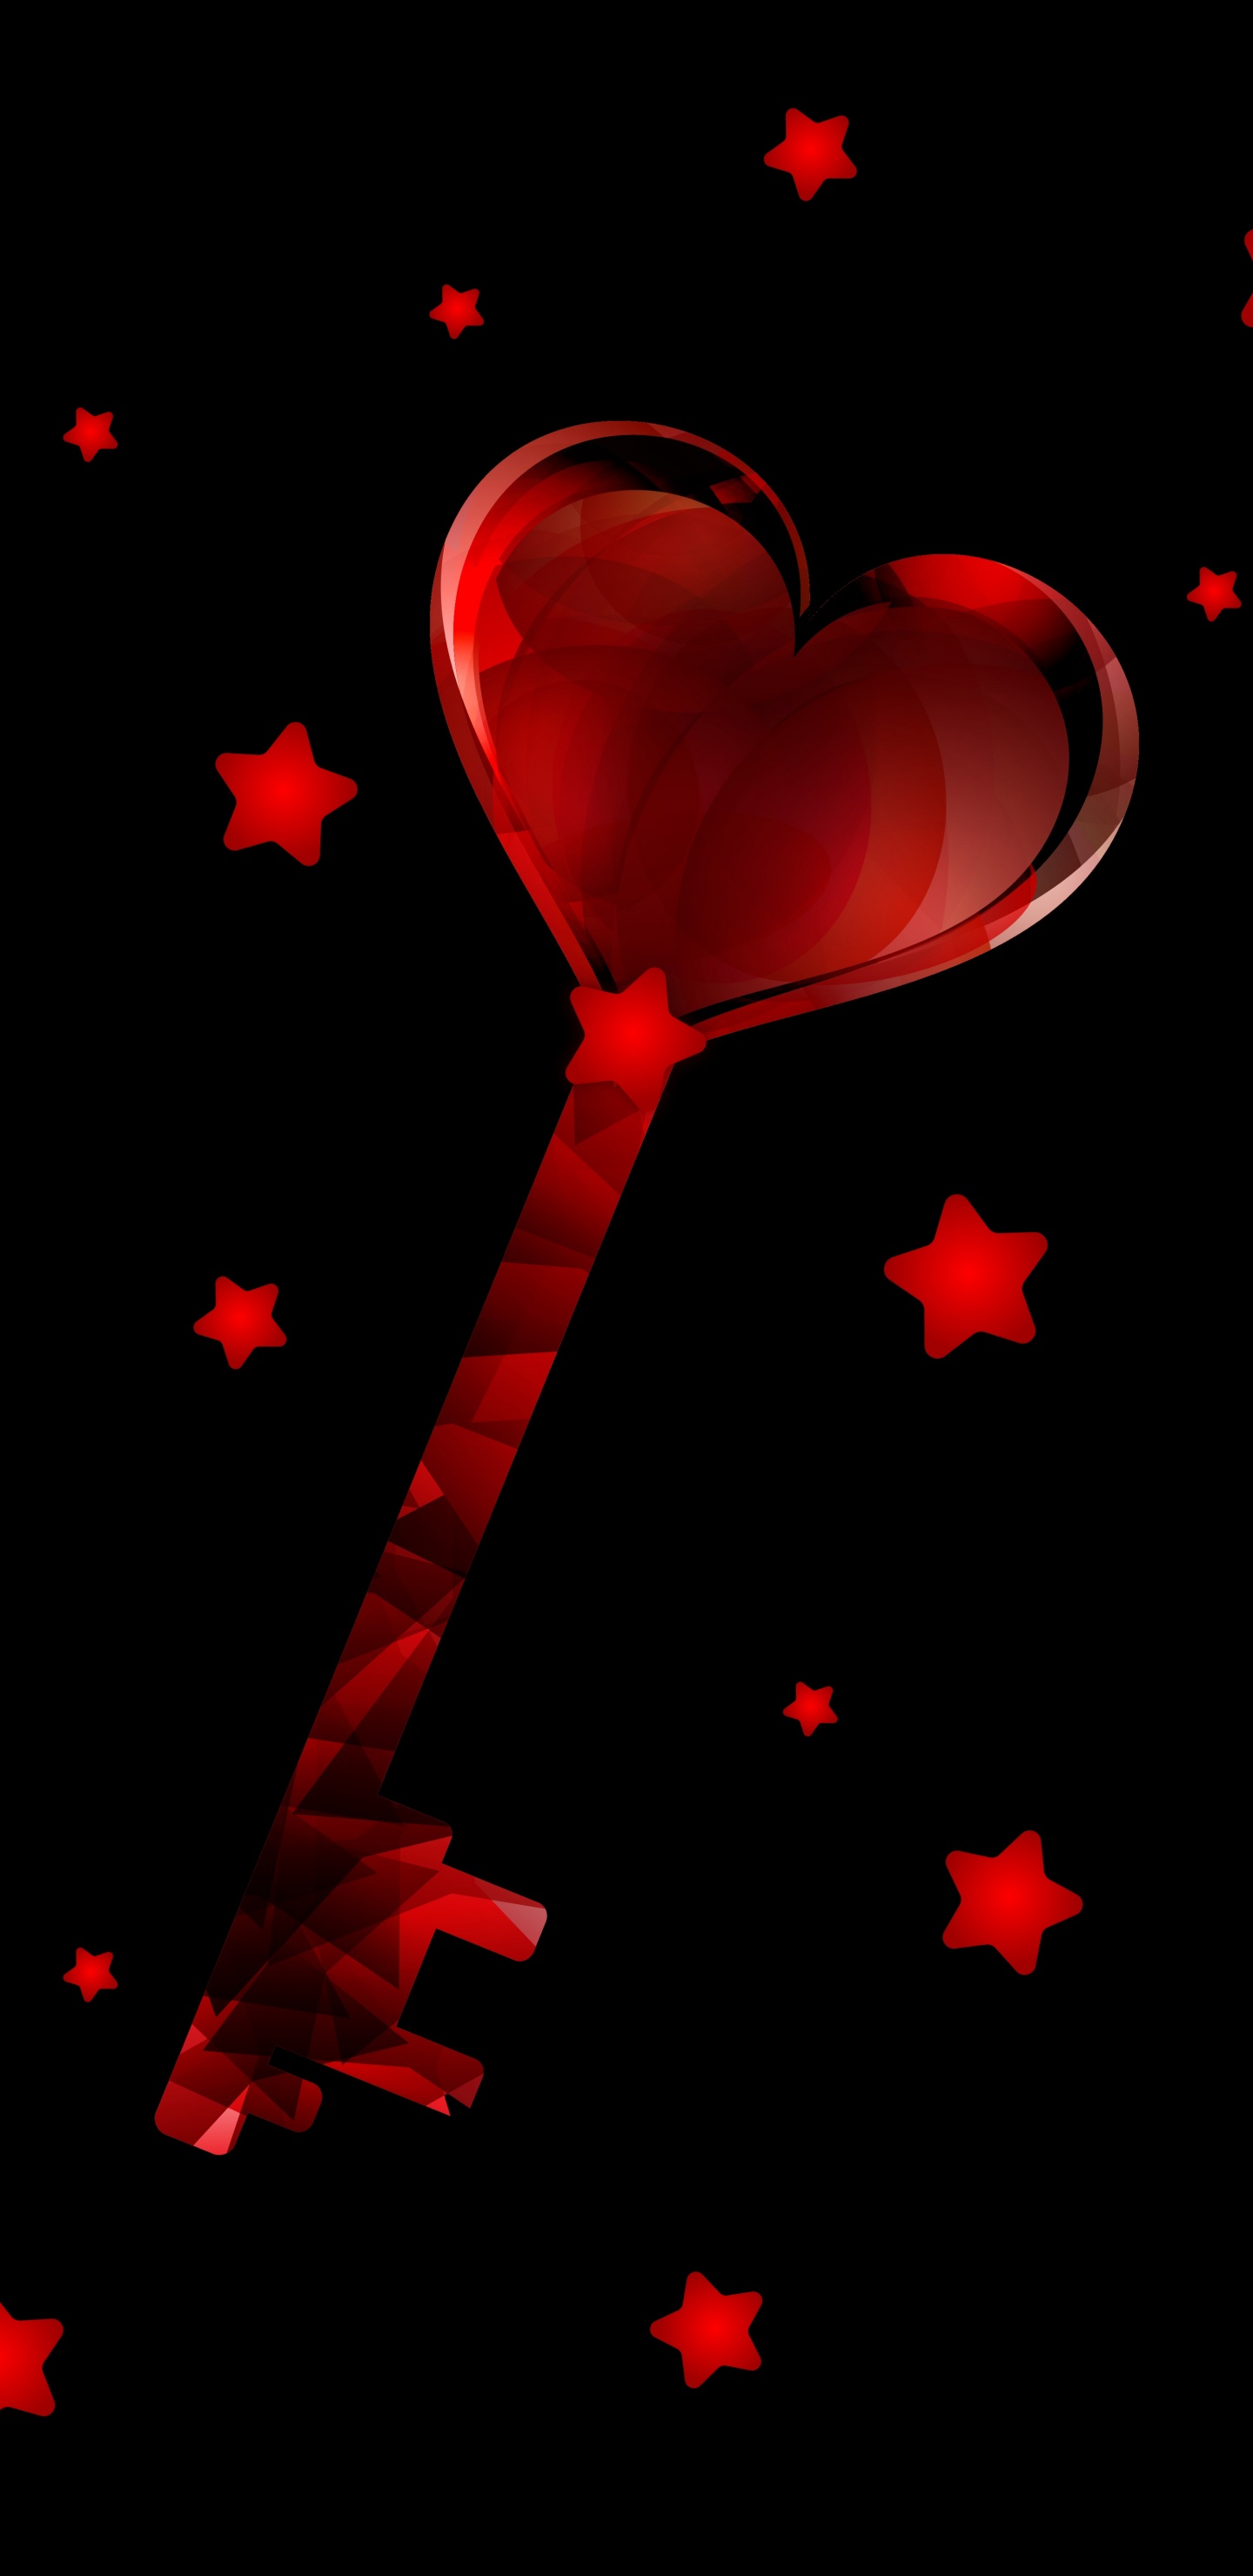 Heart, Red, Valentines Day, Love, Carmine. Wallpaper in 1440x2960 Resolution